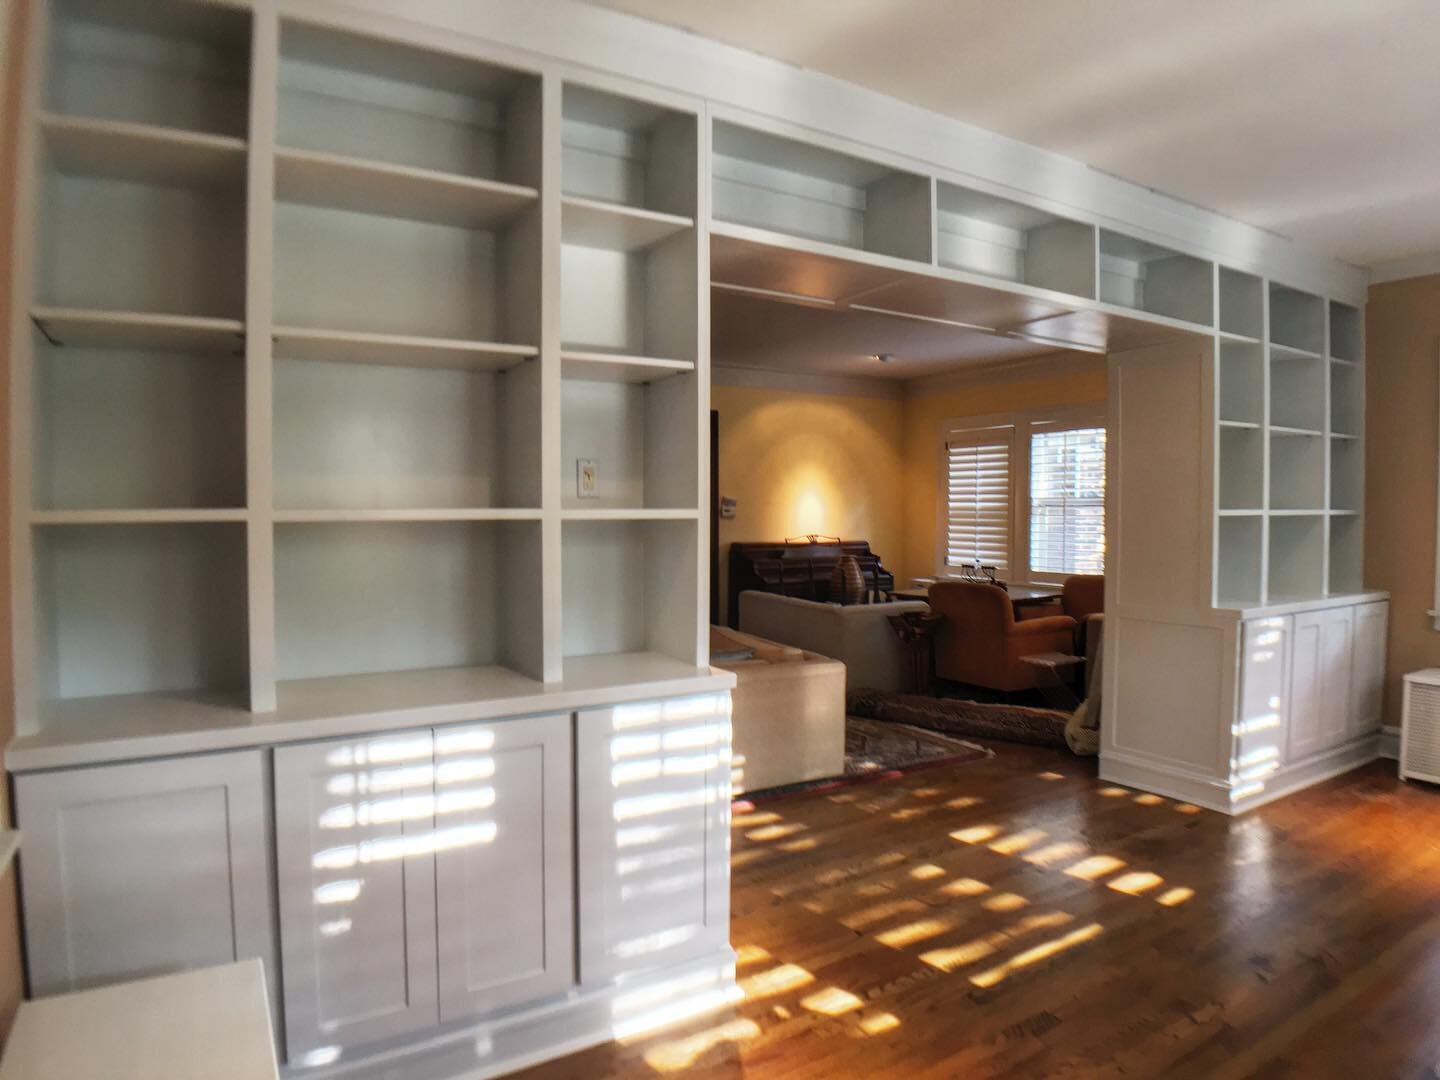 When our clients asked how we could help them create a good-looking space for their huge collection of books, we answered with a 15&rsquo; wall-to-wall built-in bookcase with Shaker style doors &amp; paneling. 

We all agree: problem solved. 

#custo